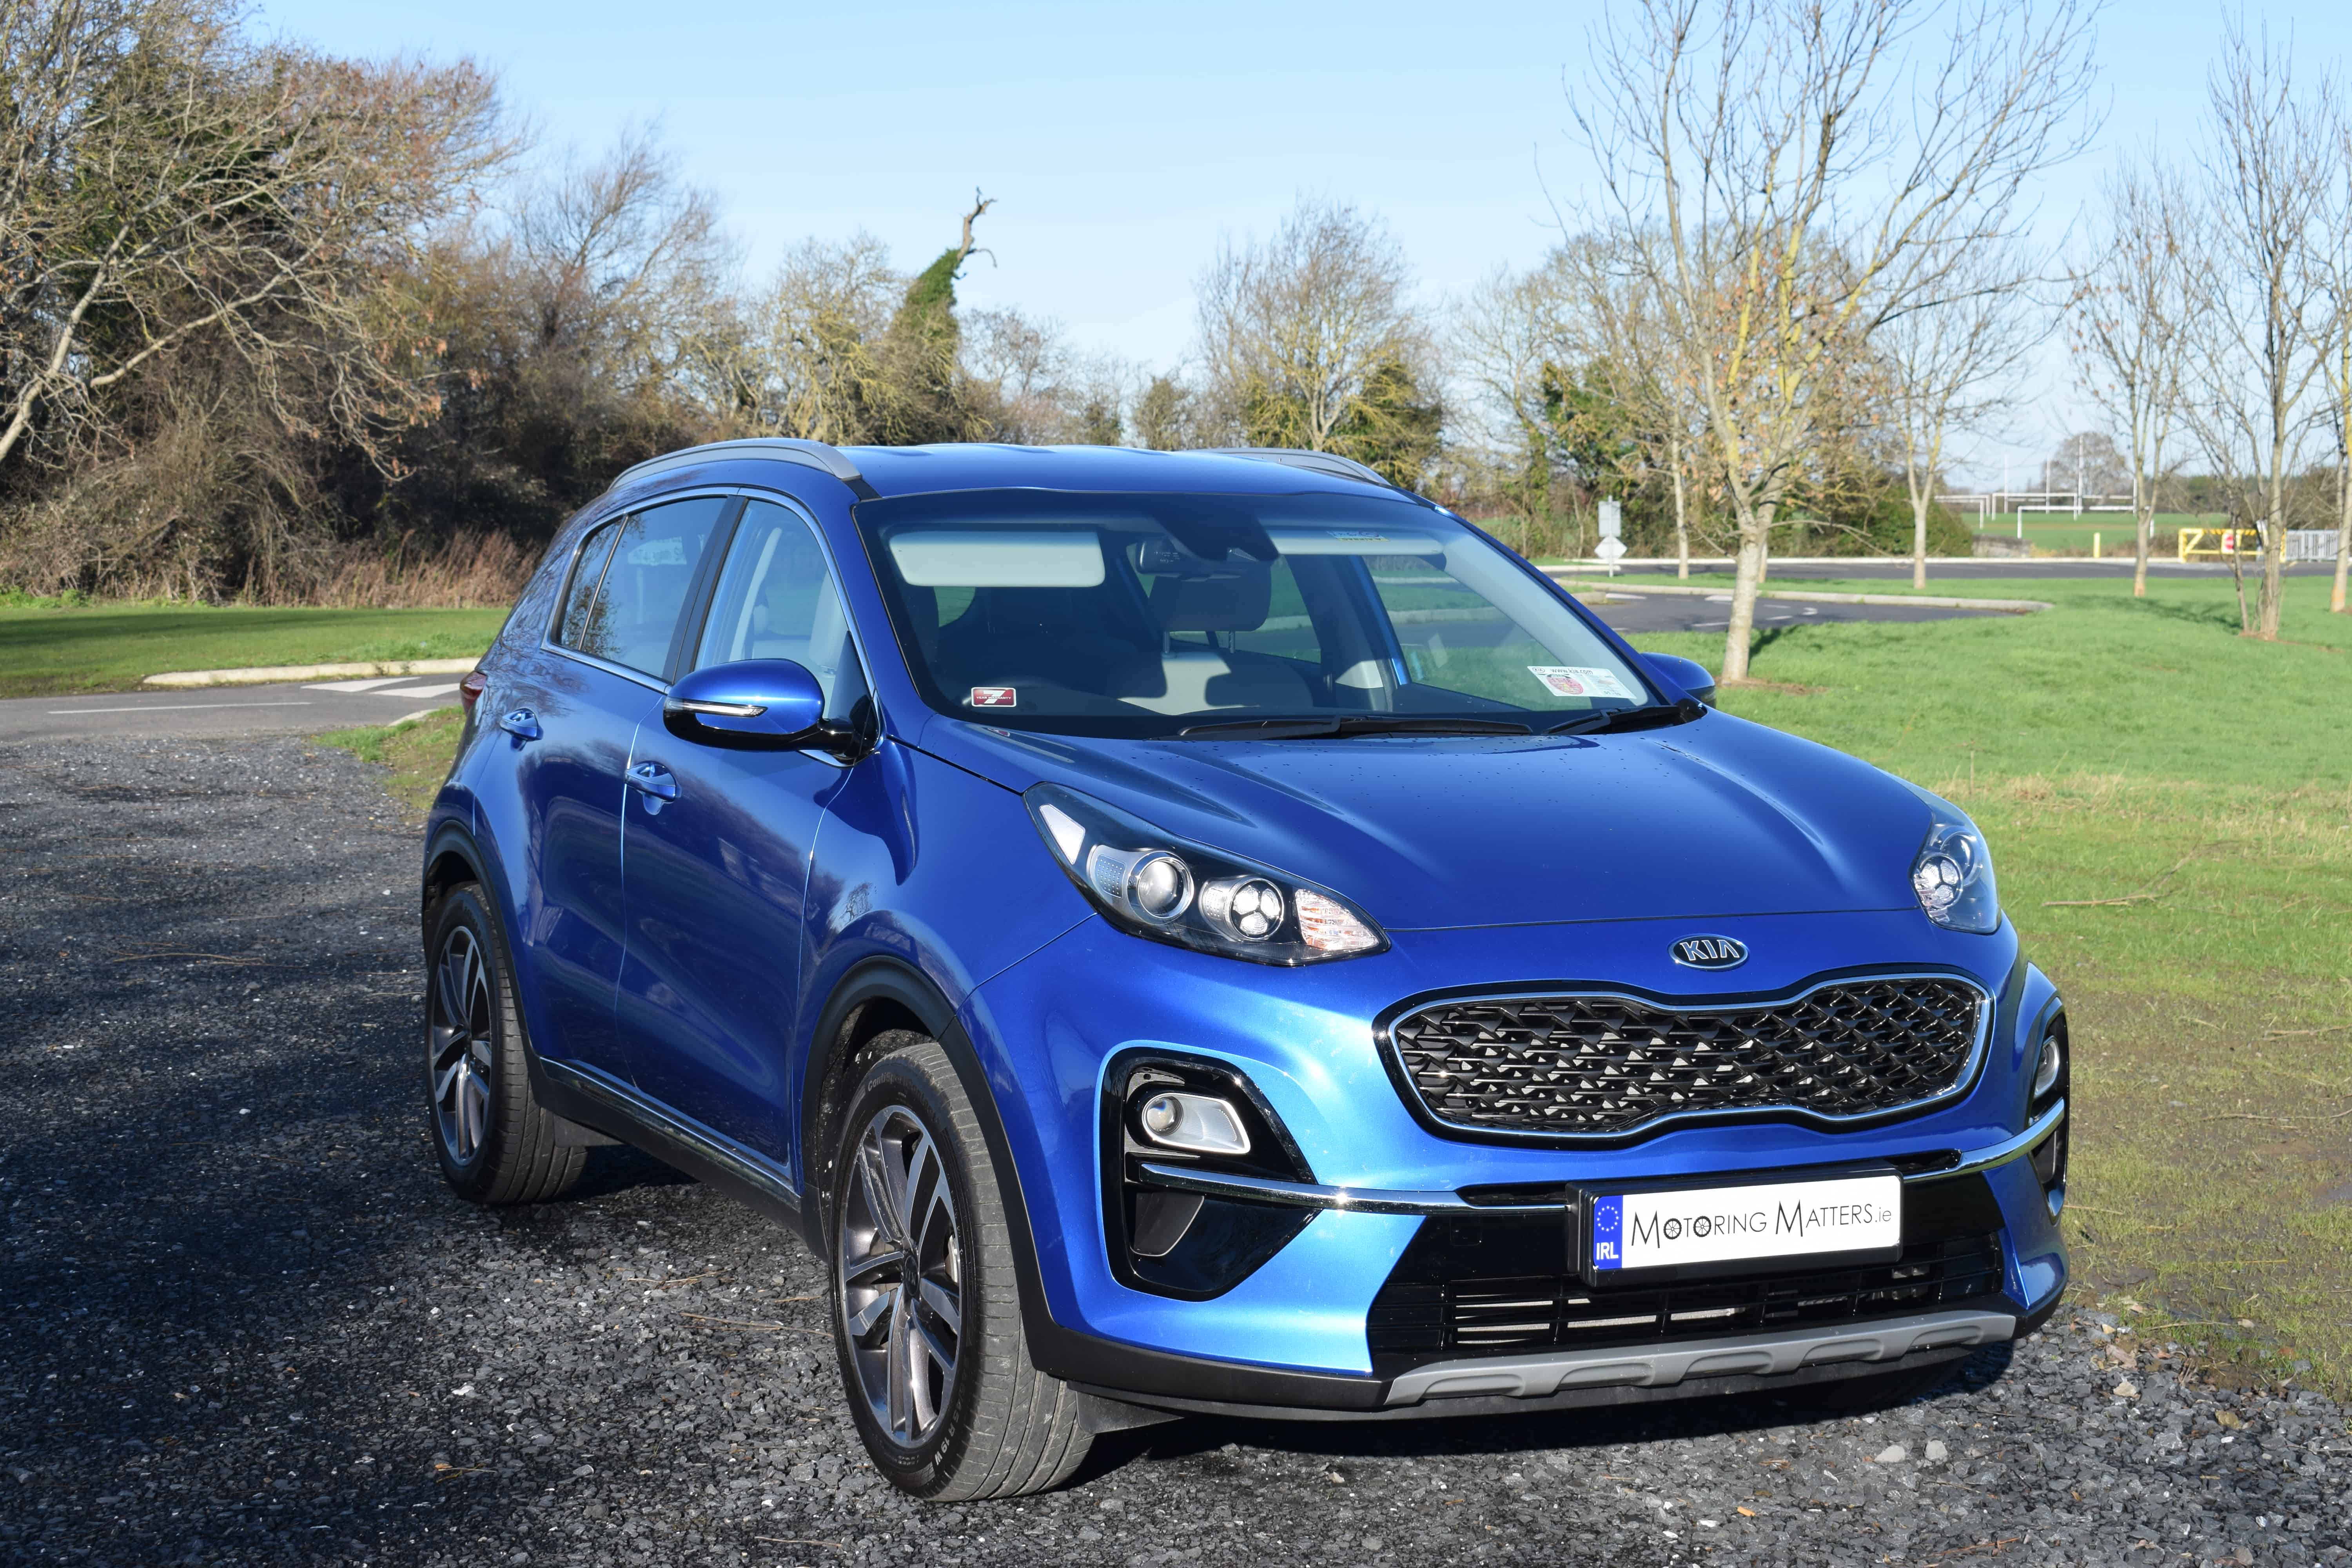 New KIA Sportage - Now Even More Appealing. - Motoring Matters